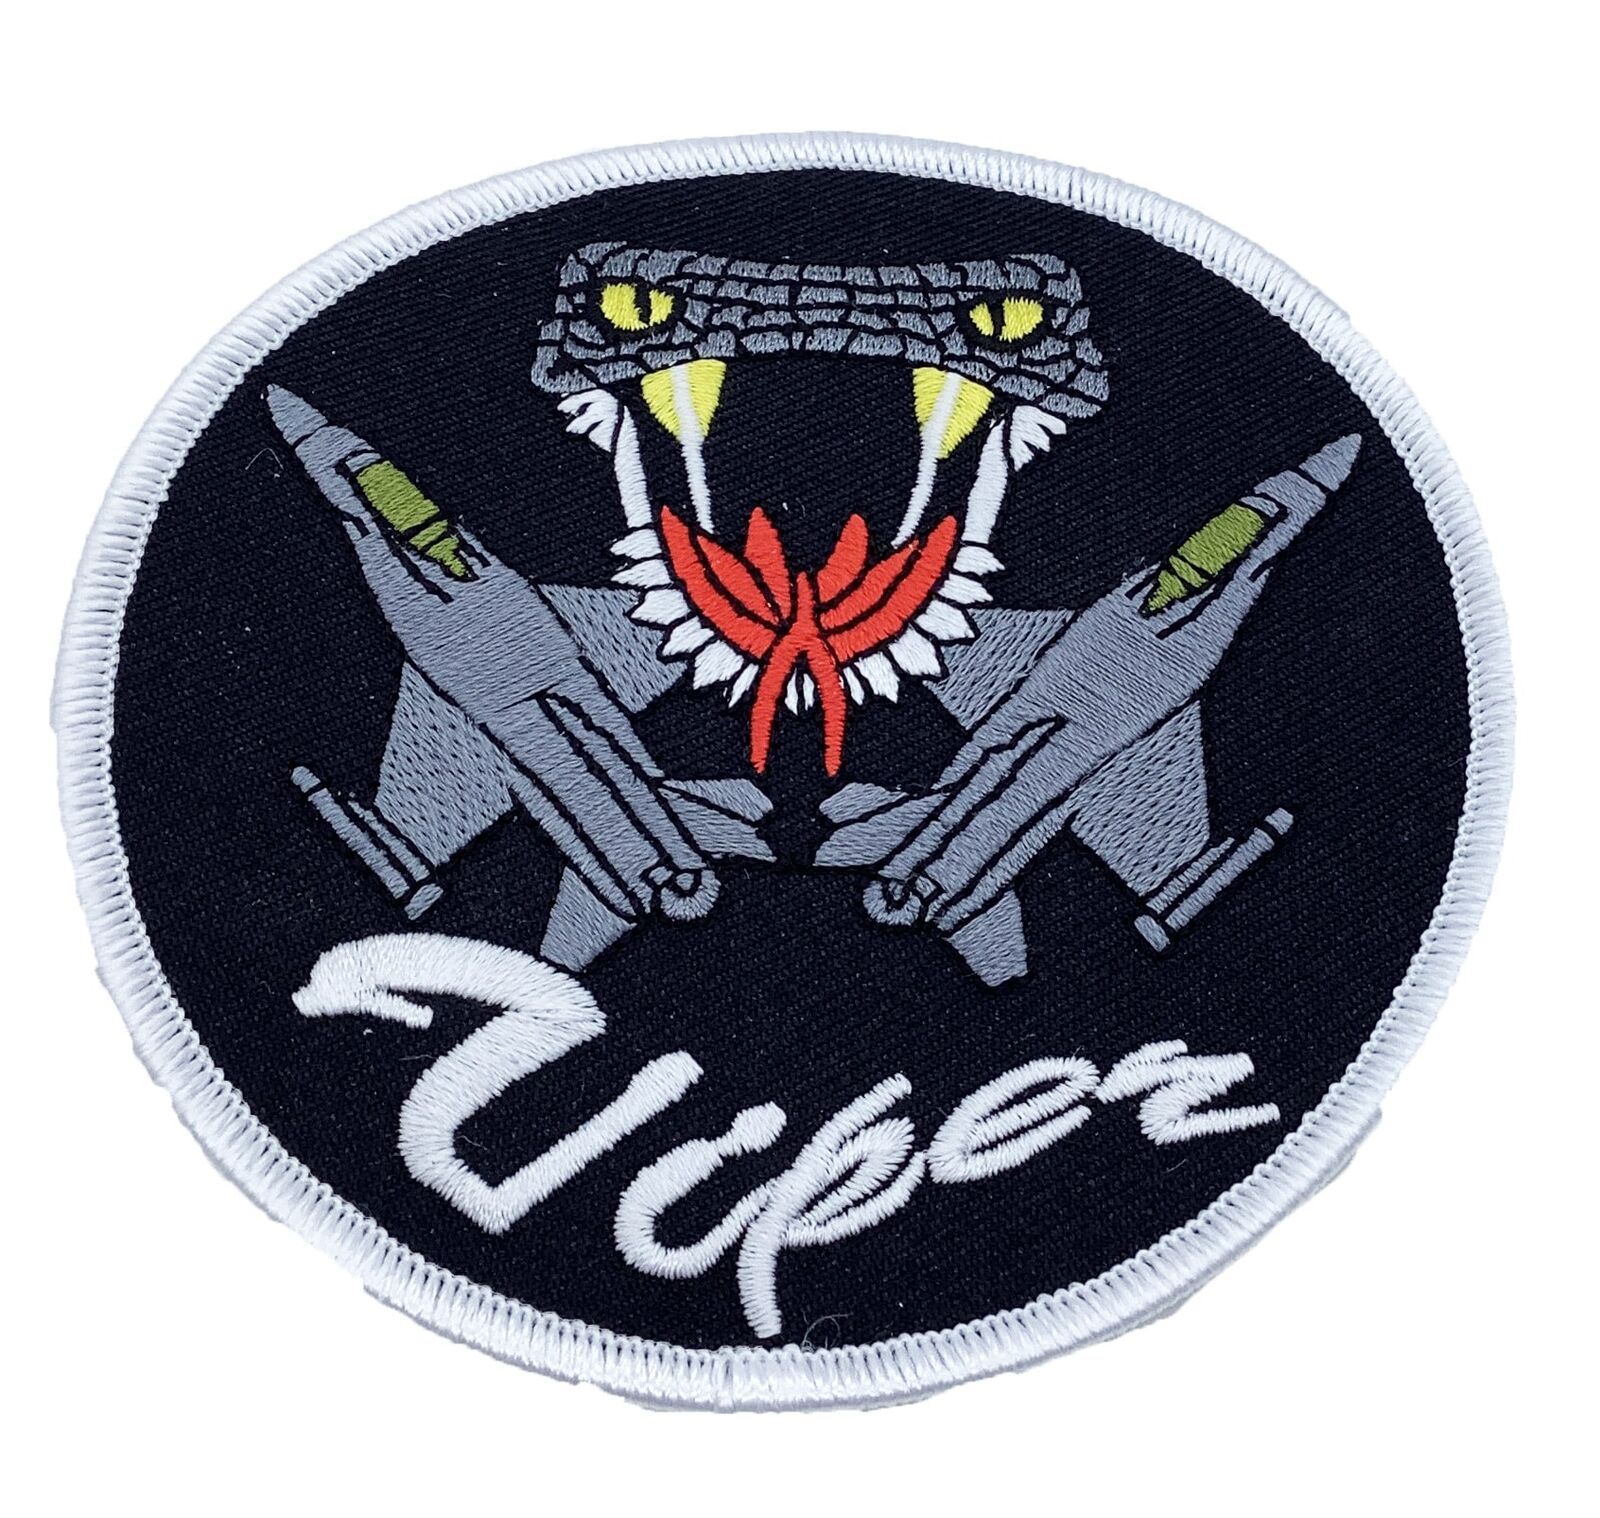 Lockheed Martin® F-16 Viper Patch – Plastic Backing/Sew on, Officially Licensed